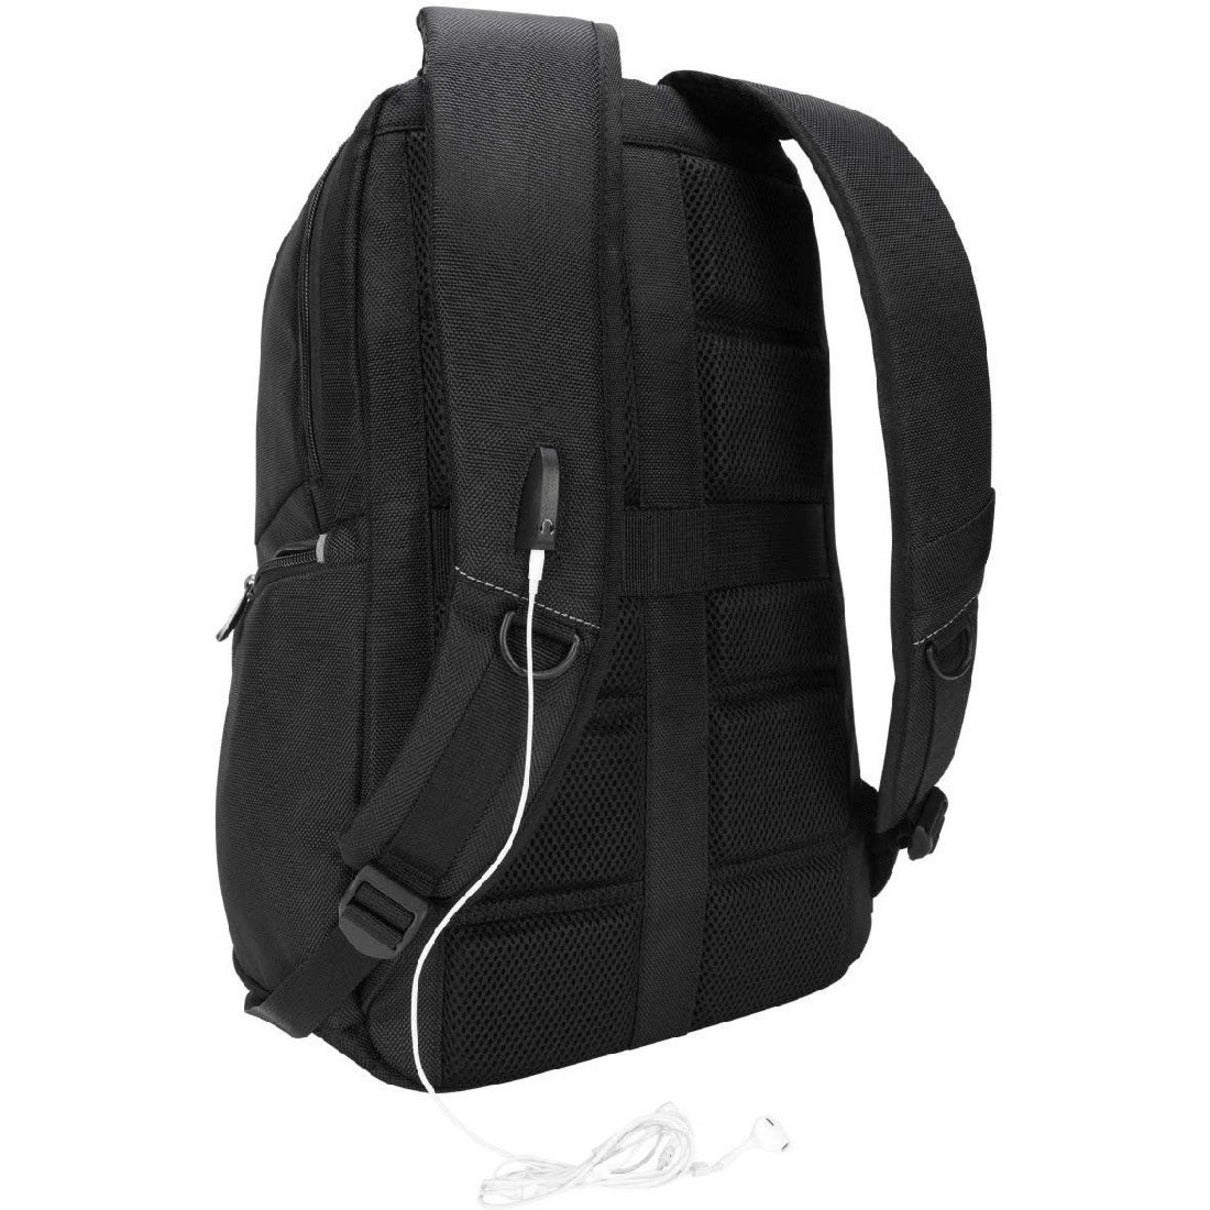 Targus Carrying Case for 16" Notebook - Black with Earphone Jack in strap